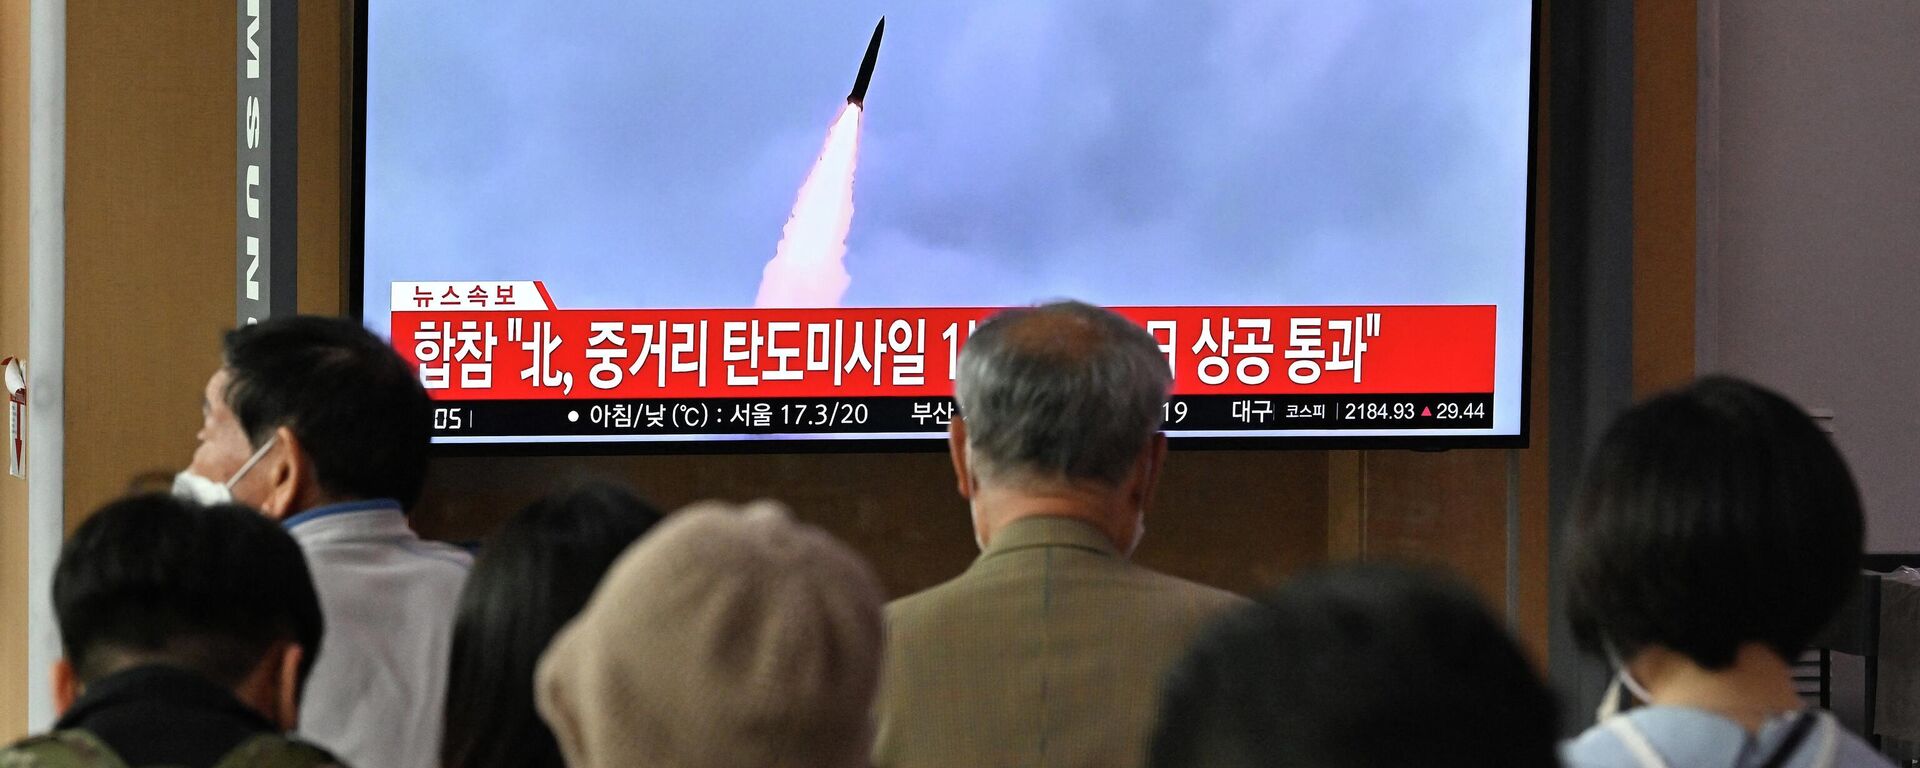 People watch a television screen showing a news broadcast with file footage of a North Korean missile test, at a railway station in Seoul on October 4, 2022 - Sputnik International, 1920, 08.10.2022